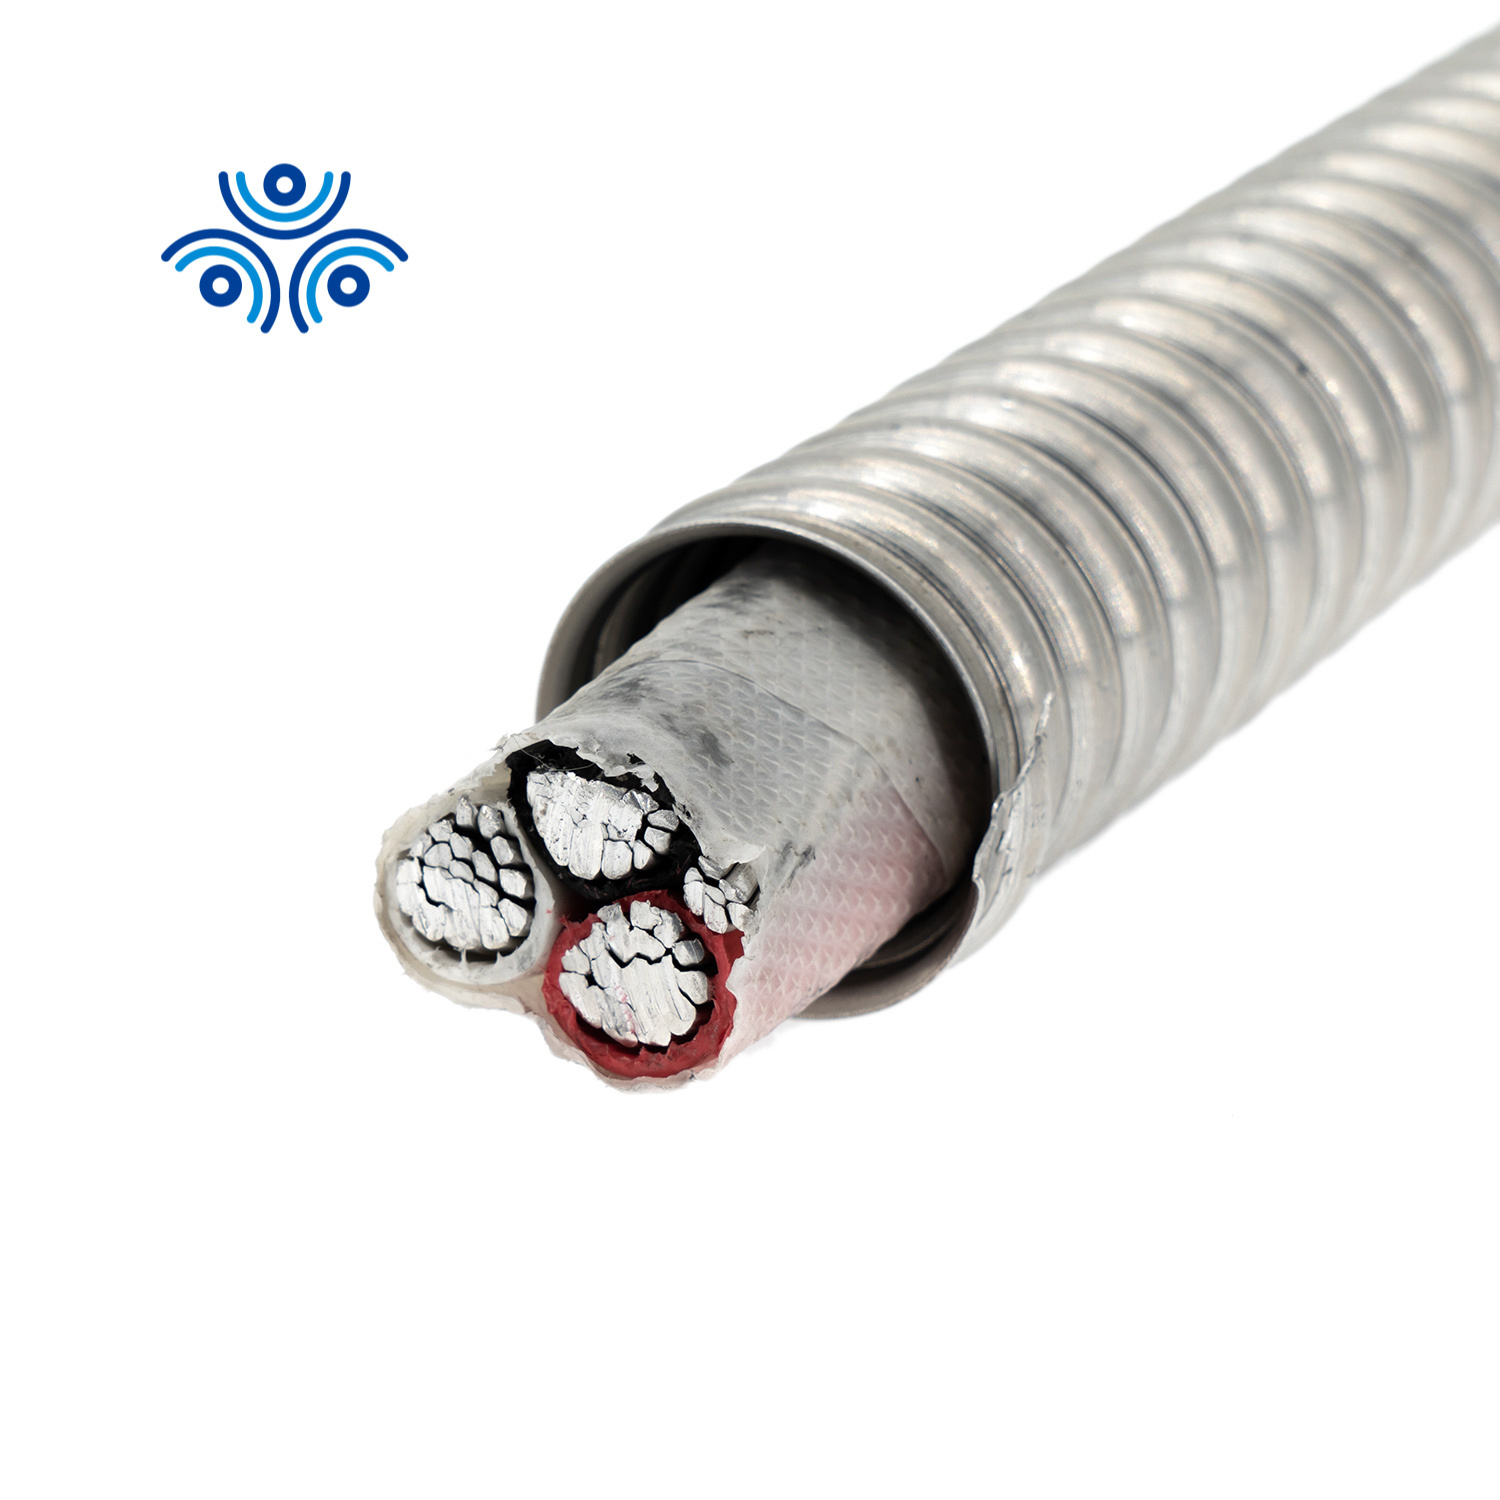 Canada Market Approved AC90 Building Wire 6/3 Stranded Aluminum 600V